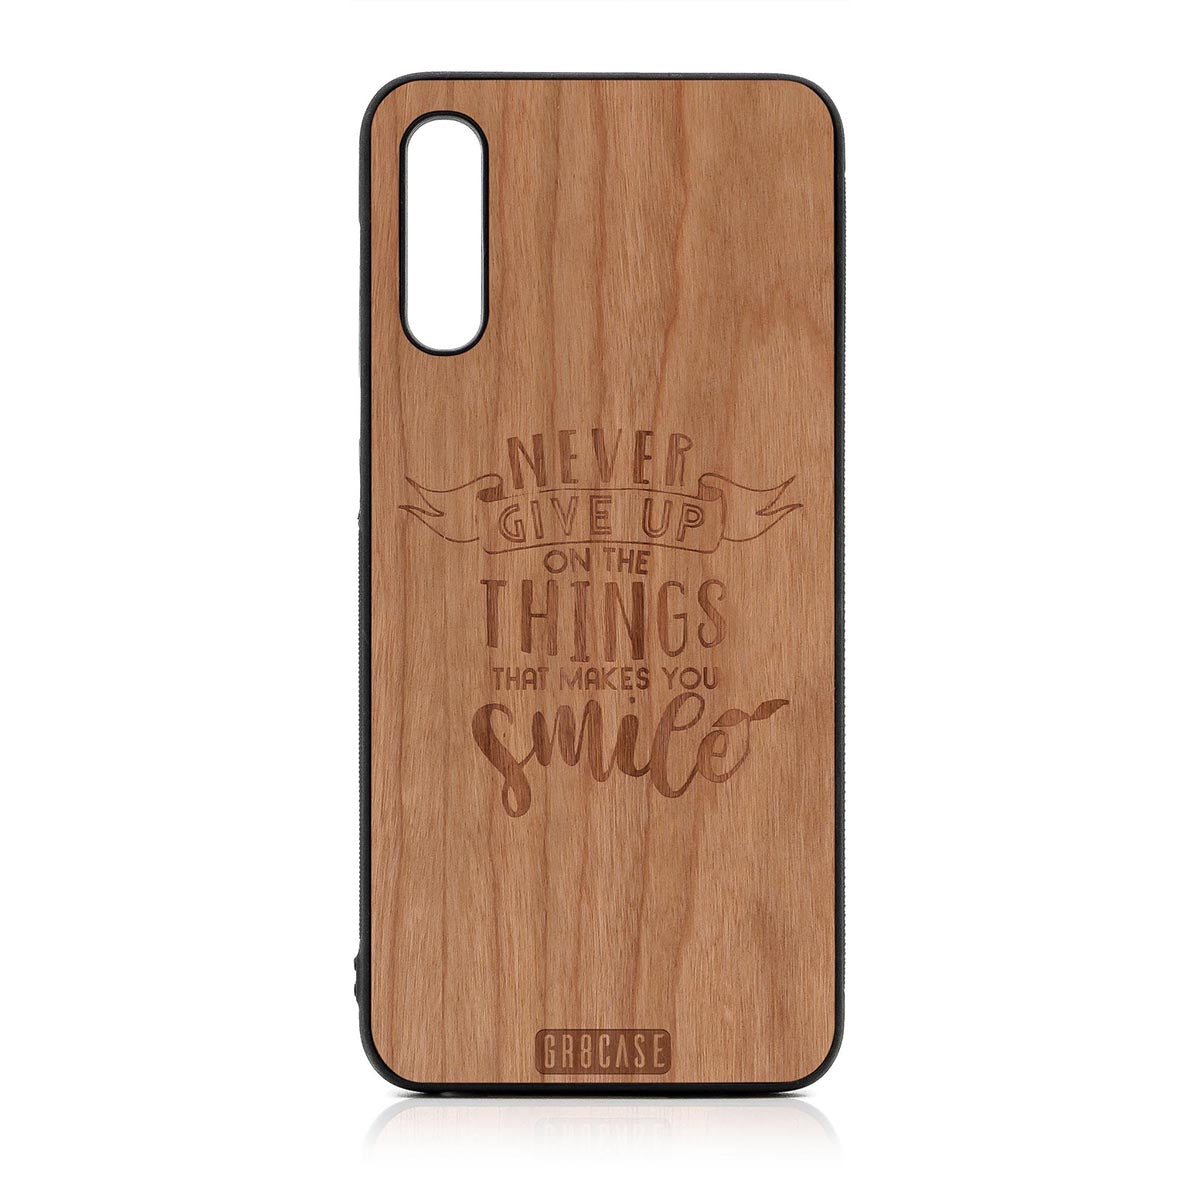 Never Give Up On The Things That Makes You Smile Design Wood Case For Samsung Galaxy A50 by GR8CASE